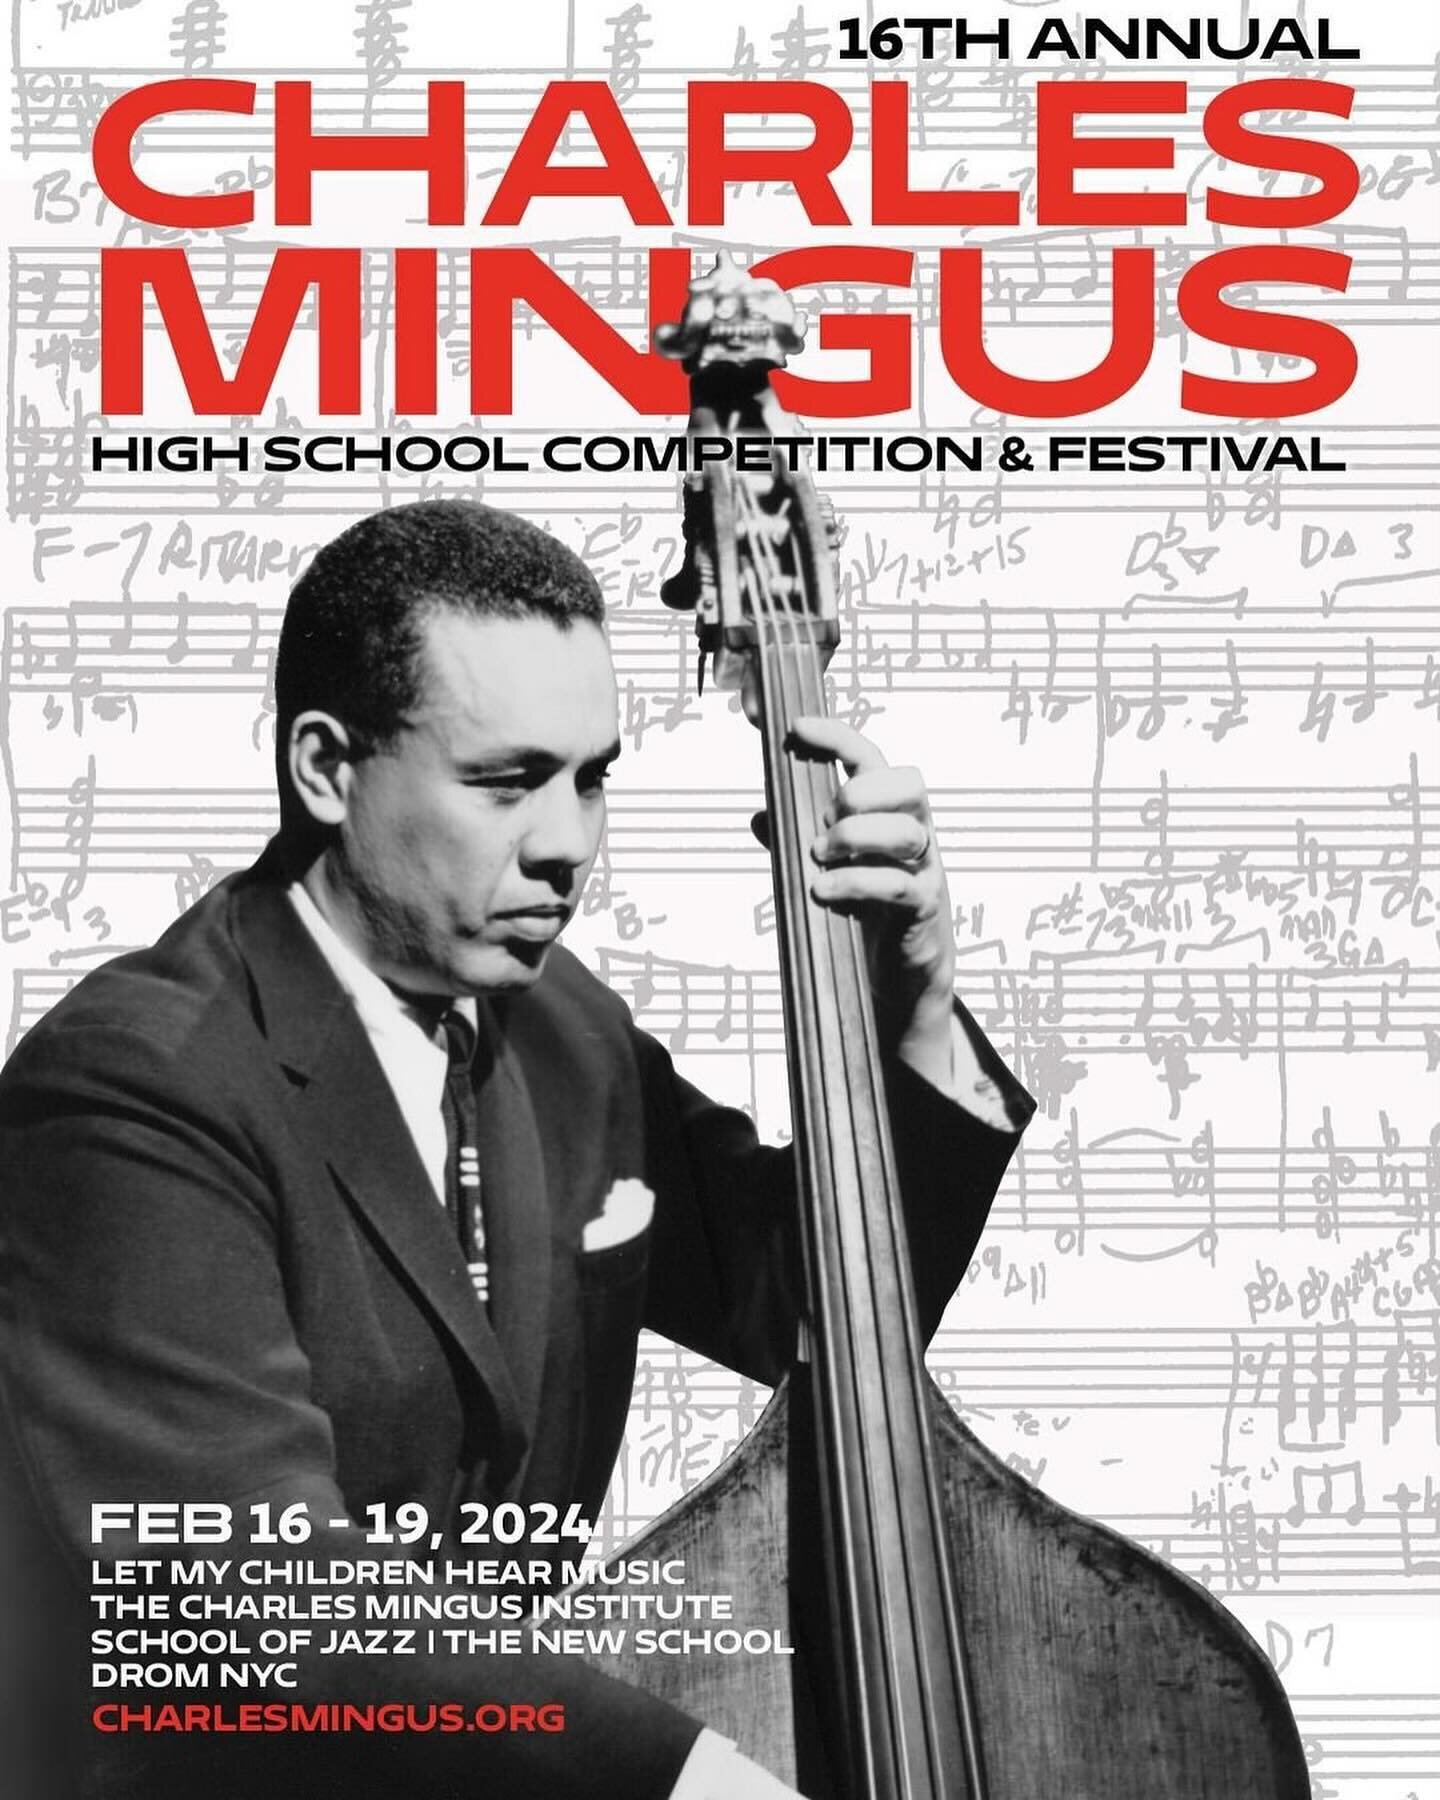 The 16th Annual Charles Mingus High School Competition &amp; Festival is in full swing! 

Events are free and open to the public

More info and livestreams at charlesmingus.org